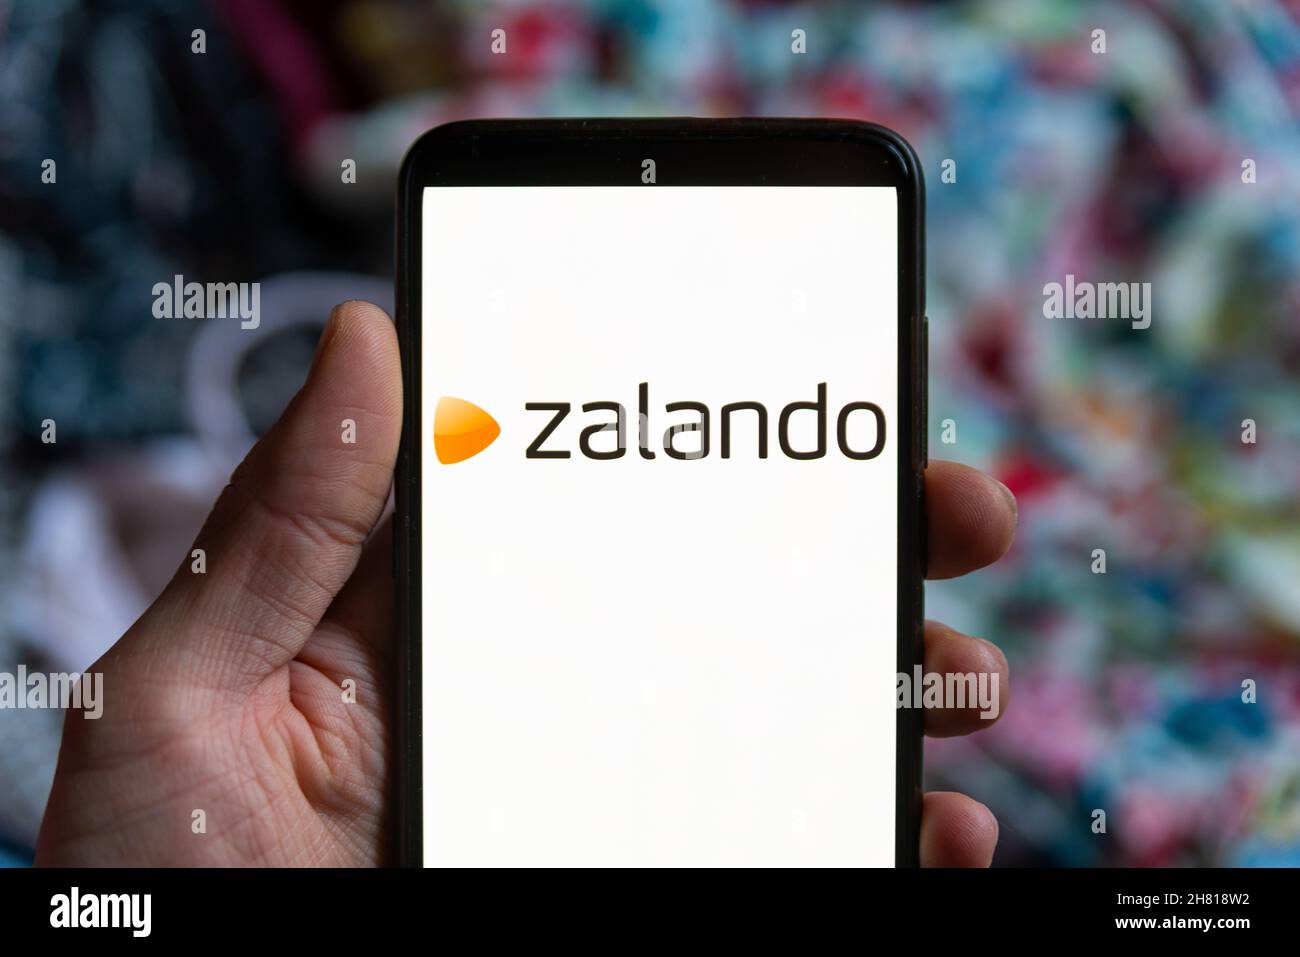 The fashion retailer Zalando mobile app logo is seen on the screen of a mobile  phone in Barcelona, Spain on November 26, 2021. Online shopping is very  popular among millennials and constantly